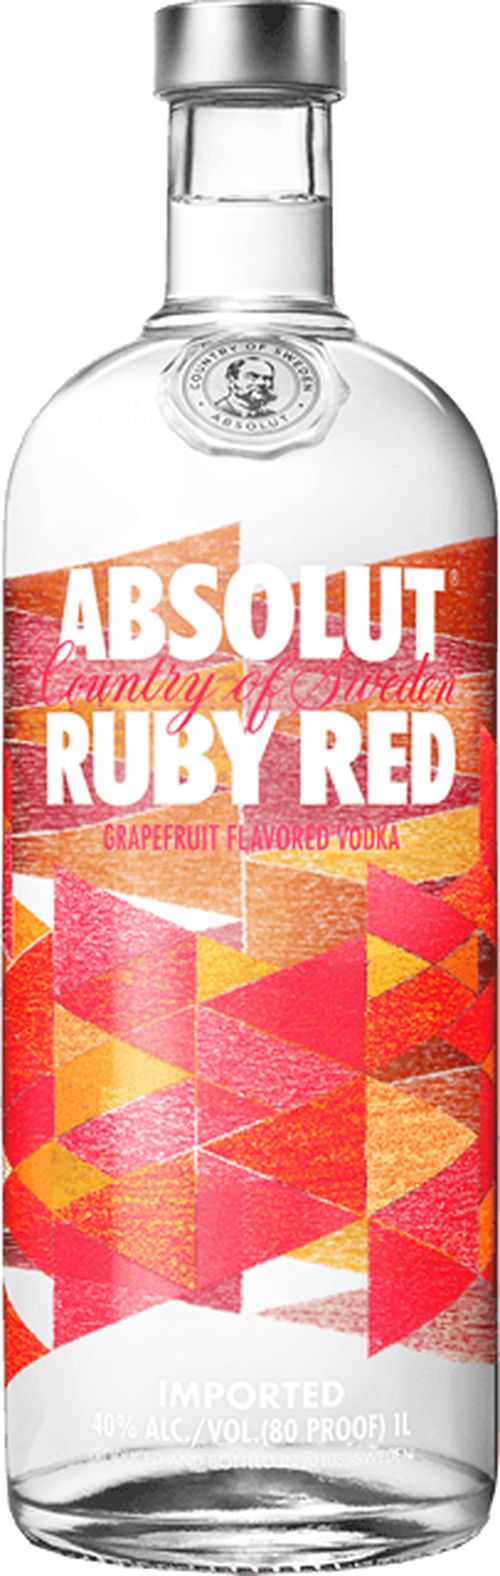 Absolut Ruby Red 40% 1l